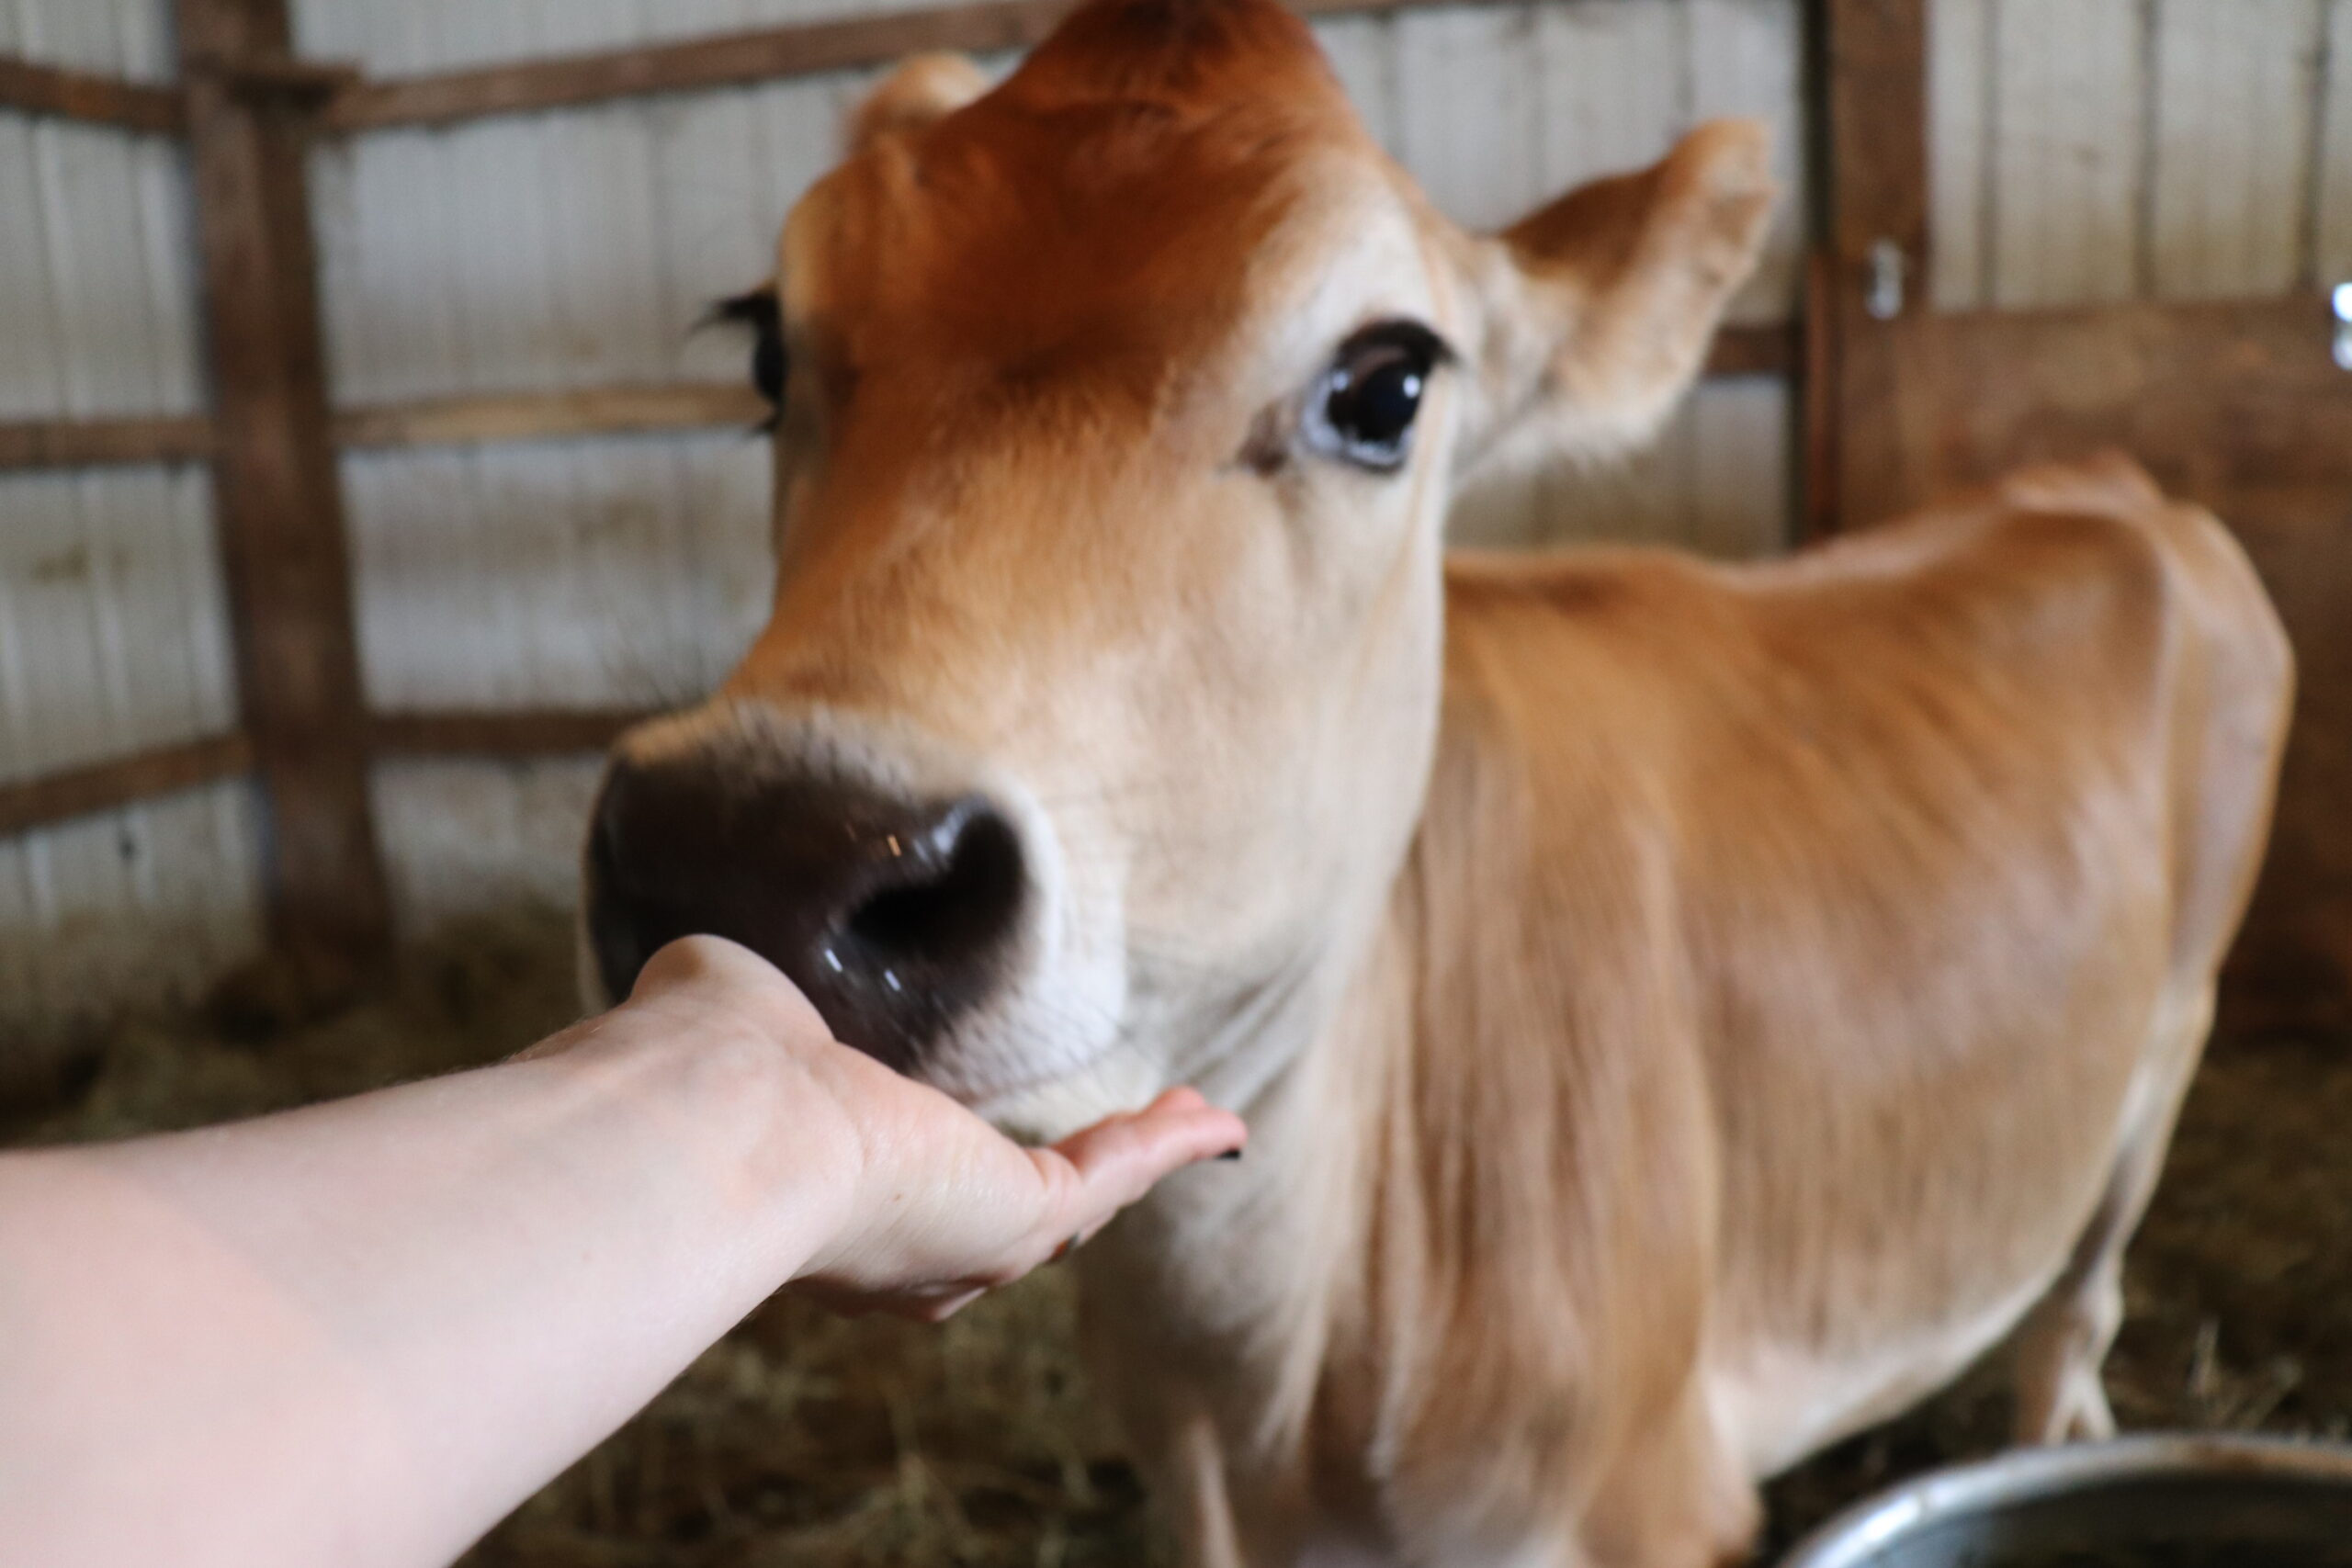 These cows are so lovable!